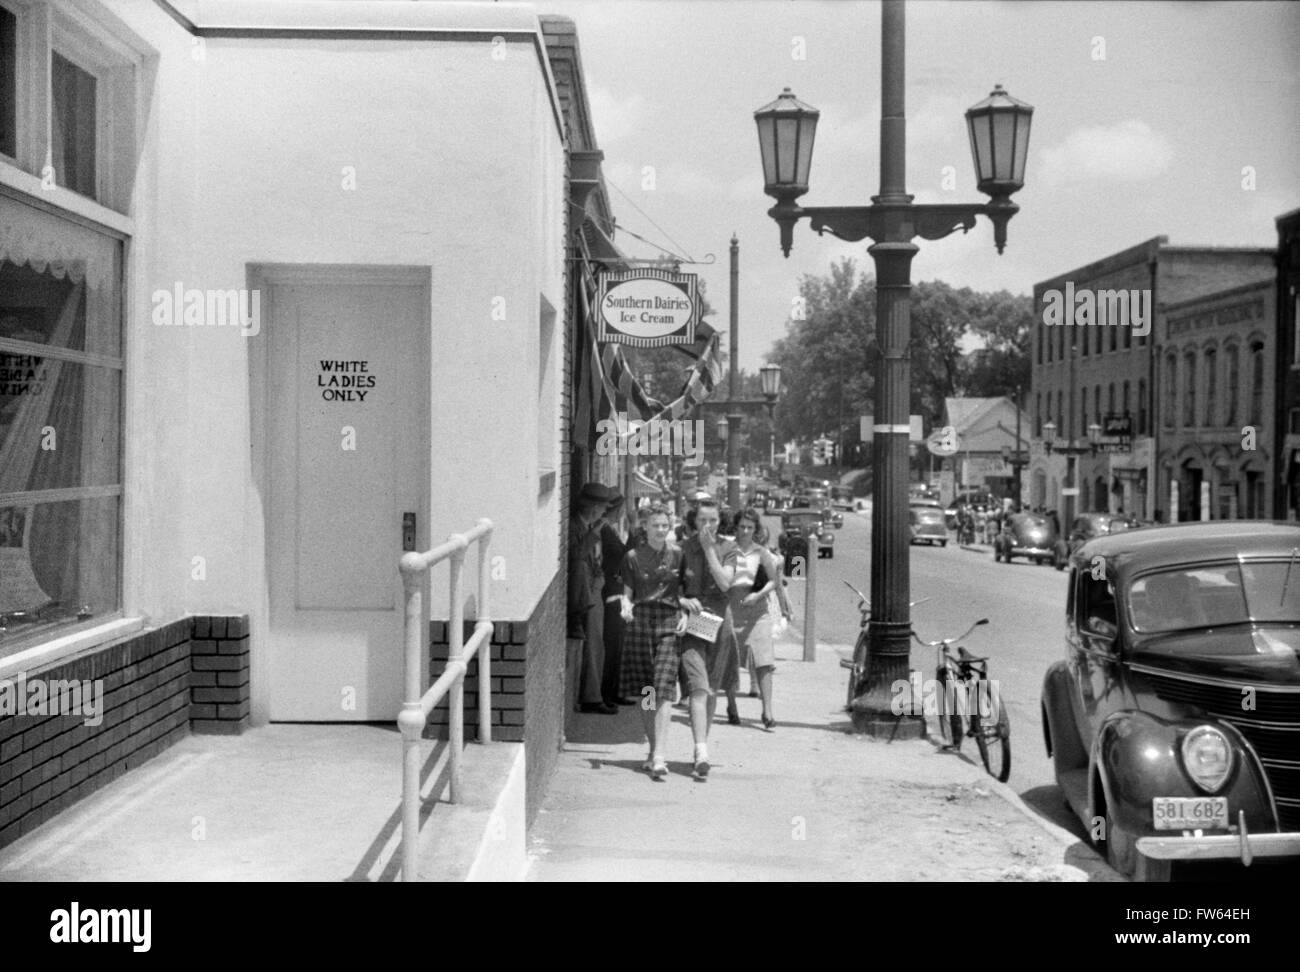 'White Ladies Only' restroom on a street in Durham, North Carolina, USA. Photo by Jack Delano, 1940. Stock Photo